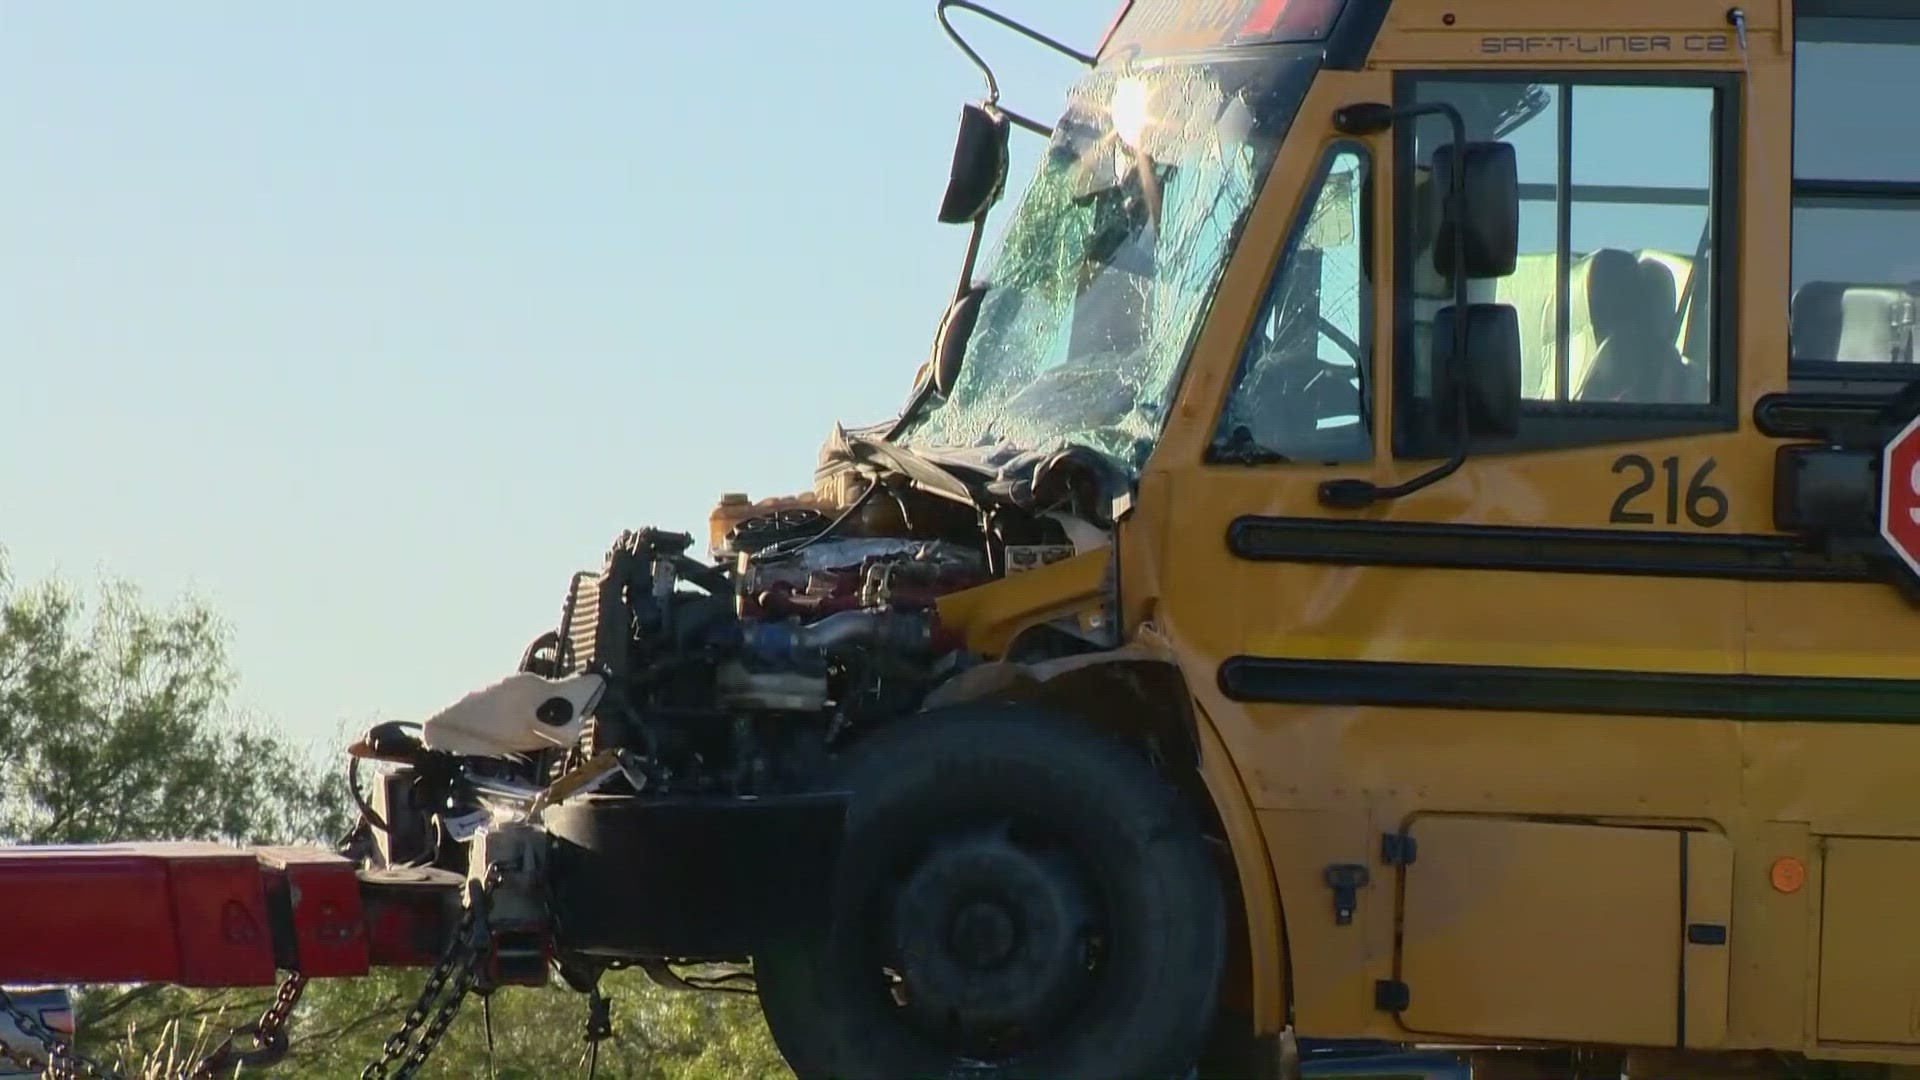 Officials said six students were hospitalized, along with the bus driver, after the Wednesday crash.